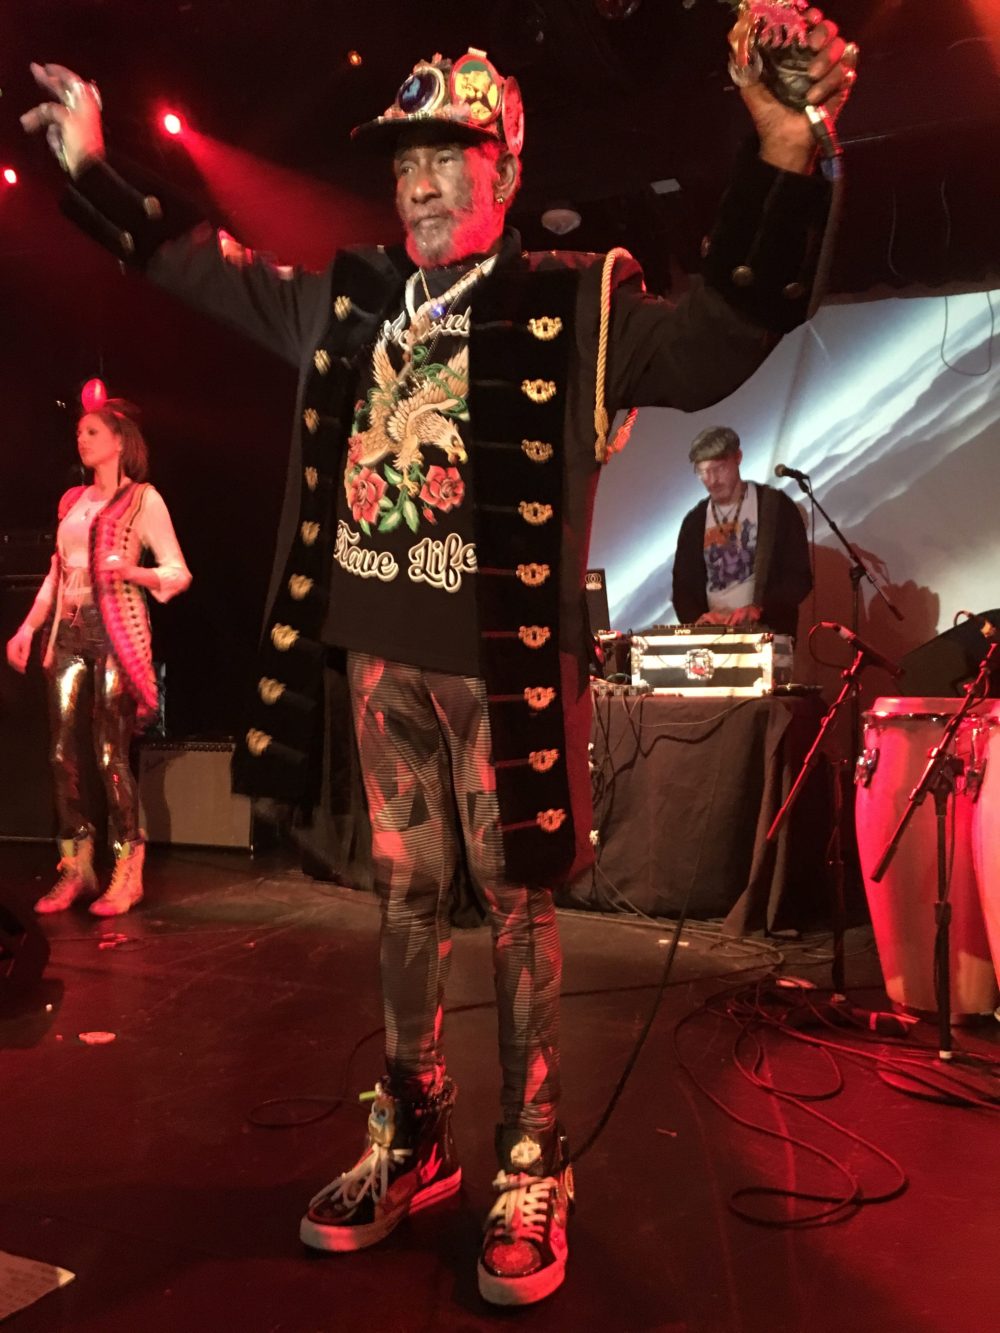 Lee “Scratch” Perry performing at the Dub Club in Los Angeles | Courtesy of Stephen A. Cooper